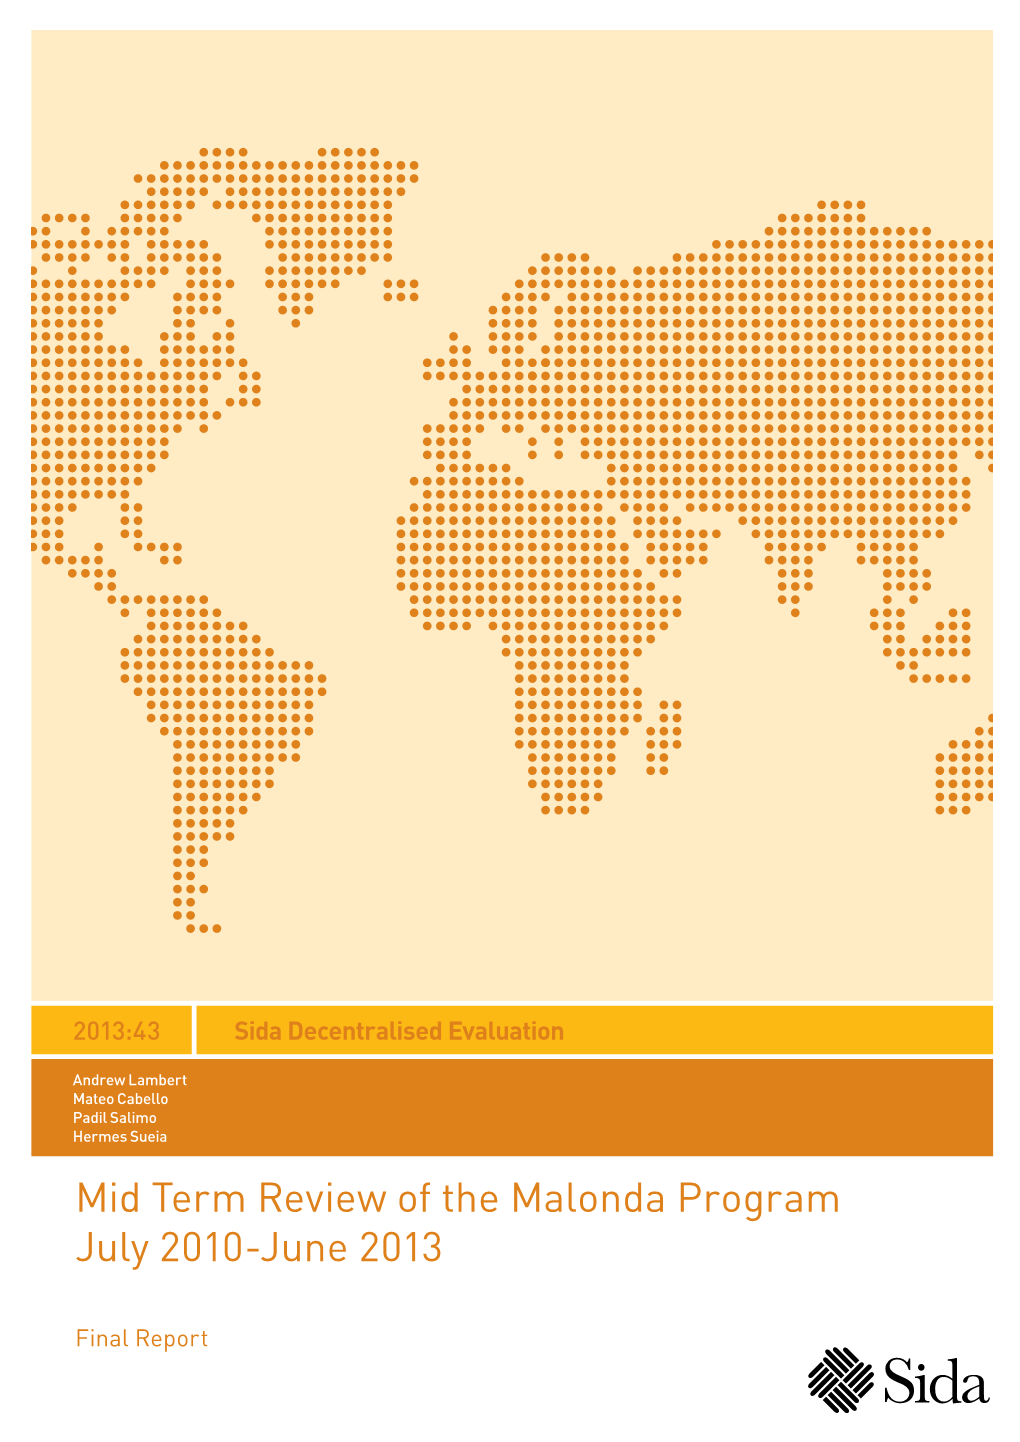 Mid Term Review of the Malonda Program July 2010-June 2013